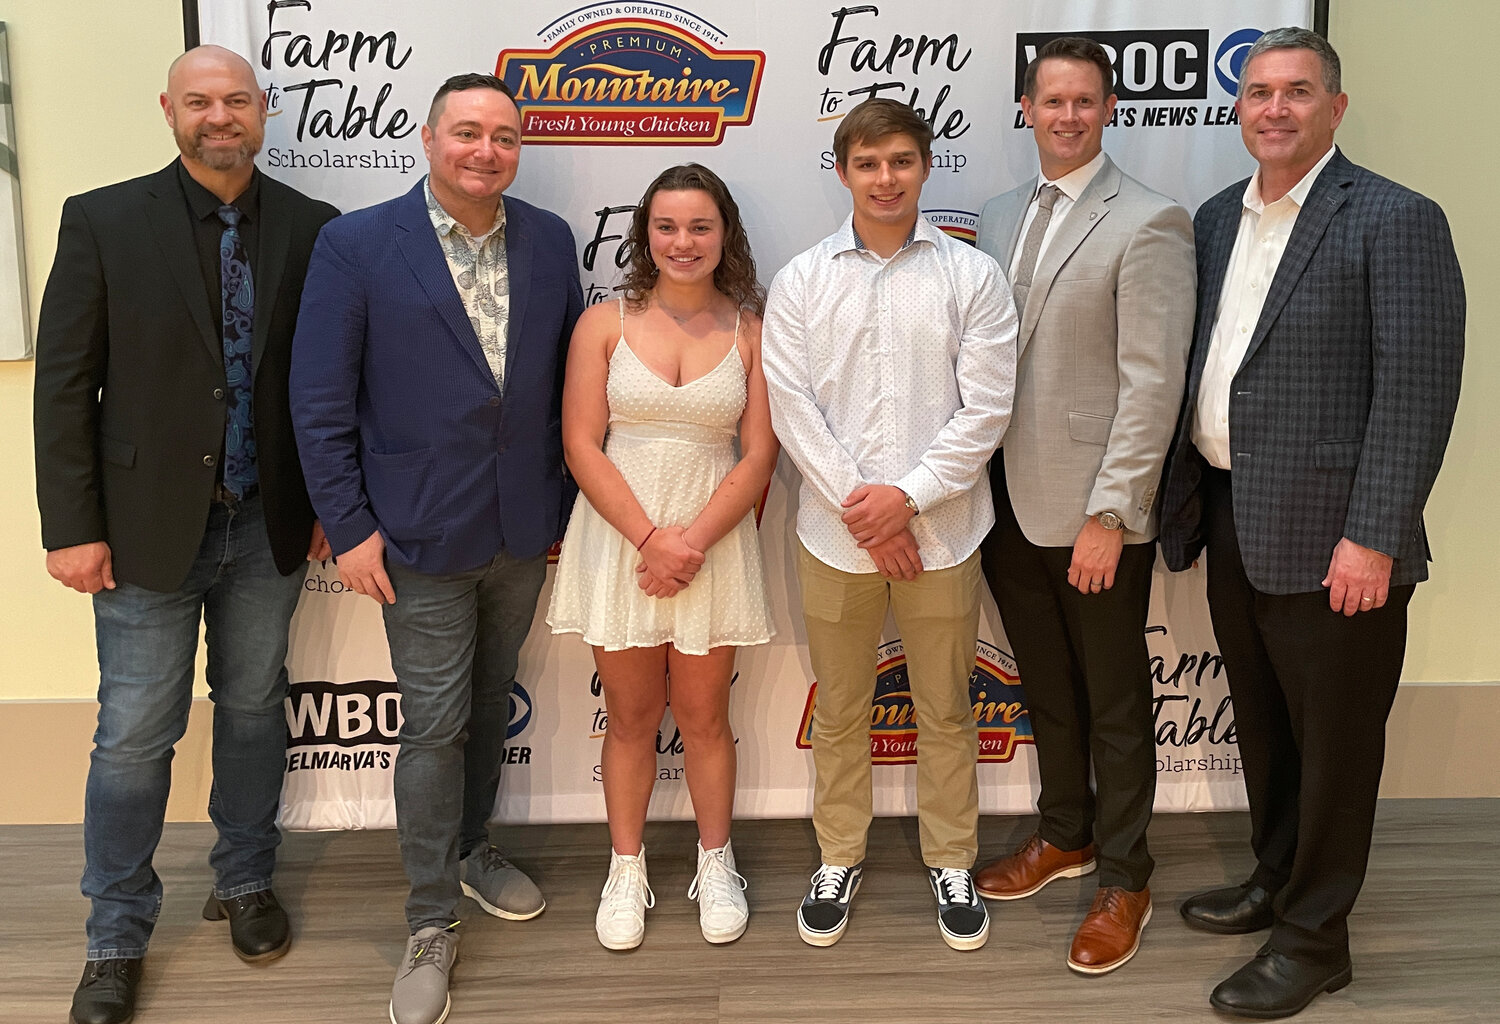 From left, "Outdoors Delmarva" host Jason Lee; Delaware celebrity chef Hari Cameron; overall Farm to Table Scholarship winners Samantha Teoli and Aidan Bell; Mountaire community relations manager Zach Evans; and Mountaire president Phillip Plylar.